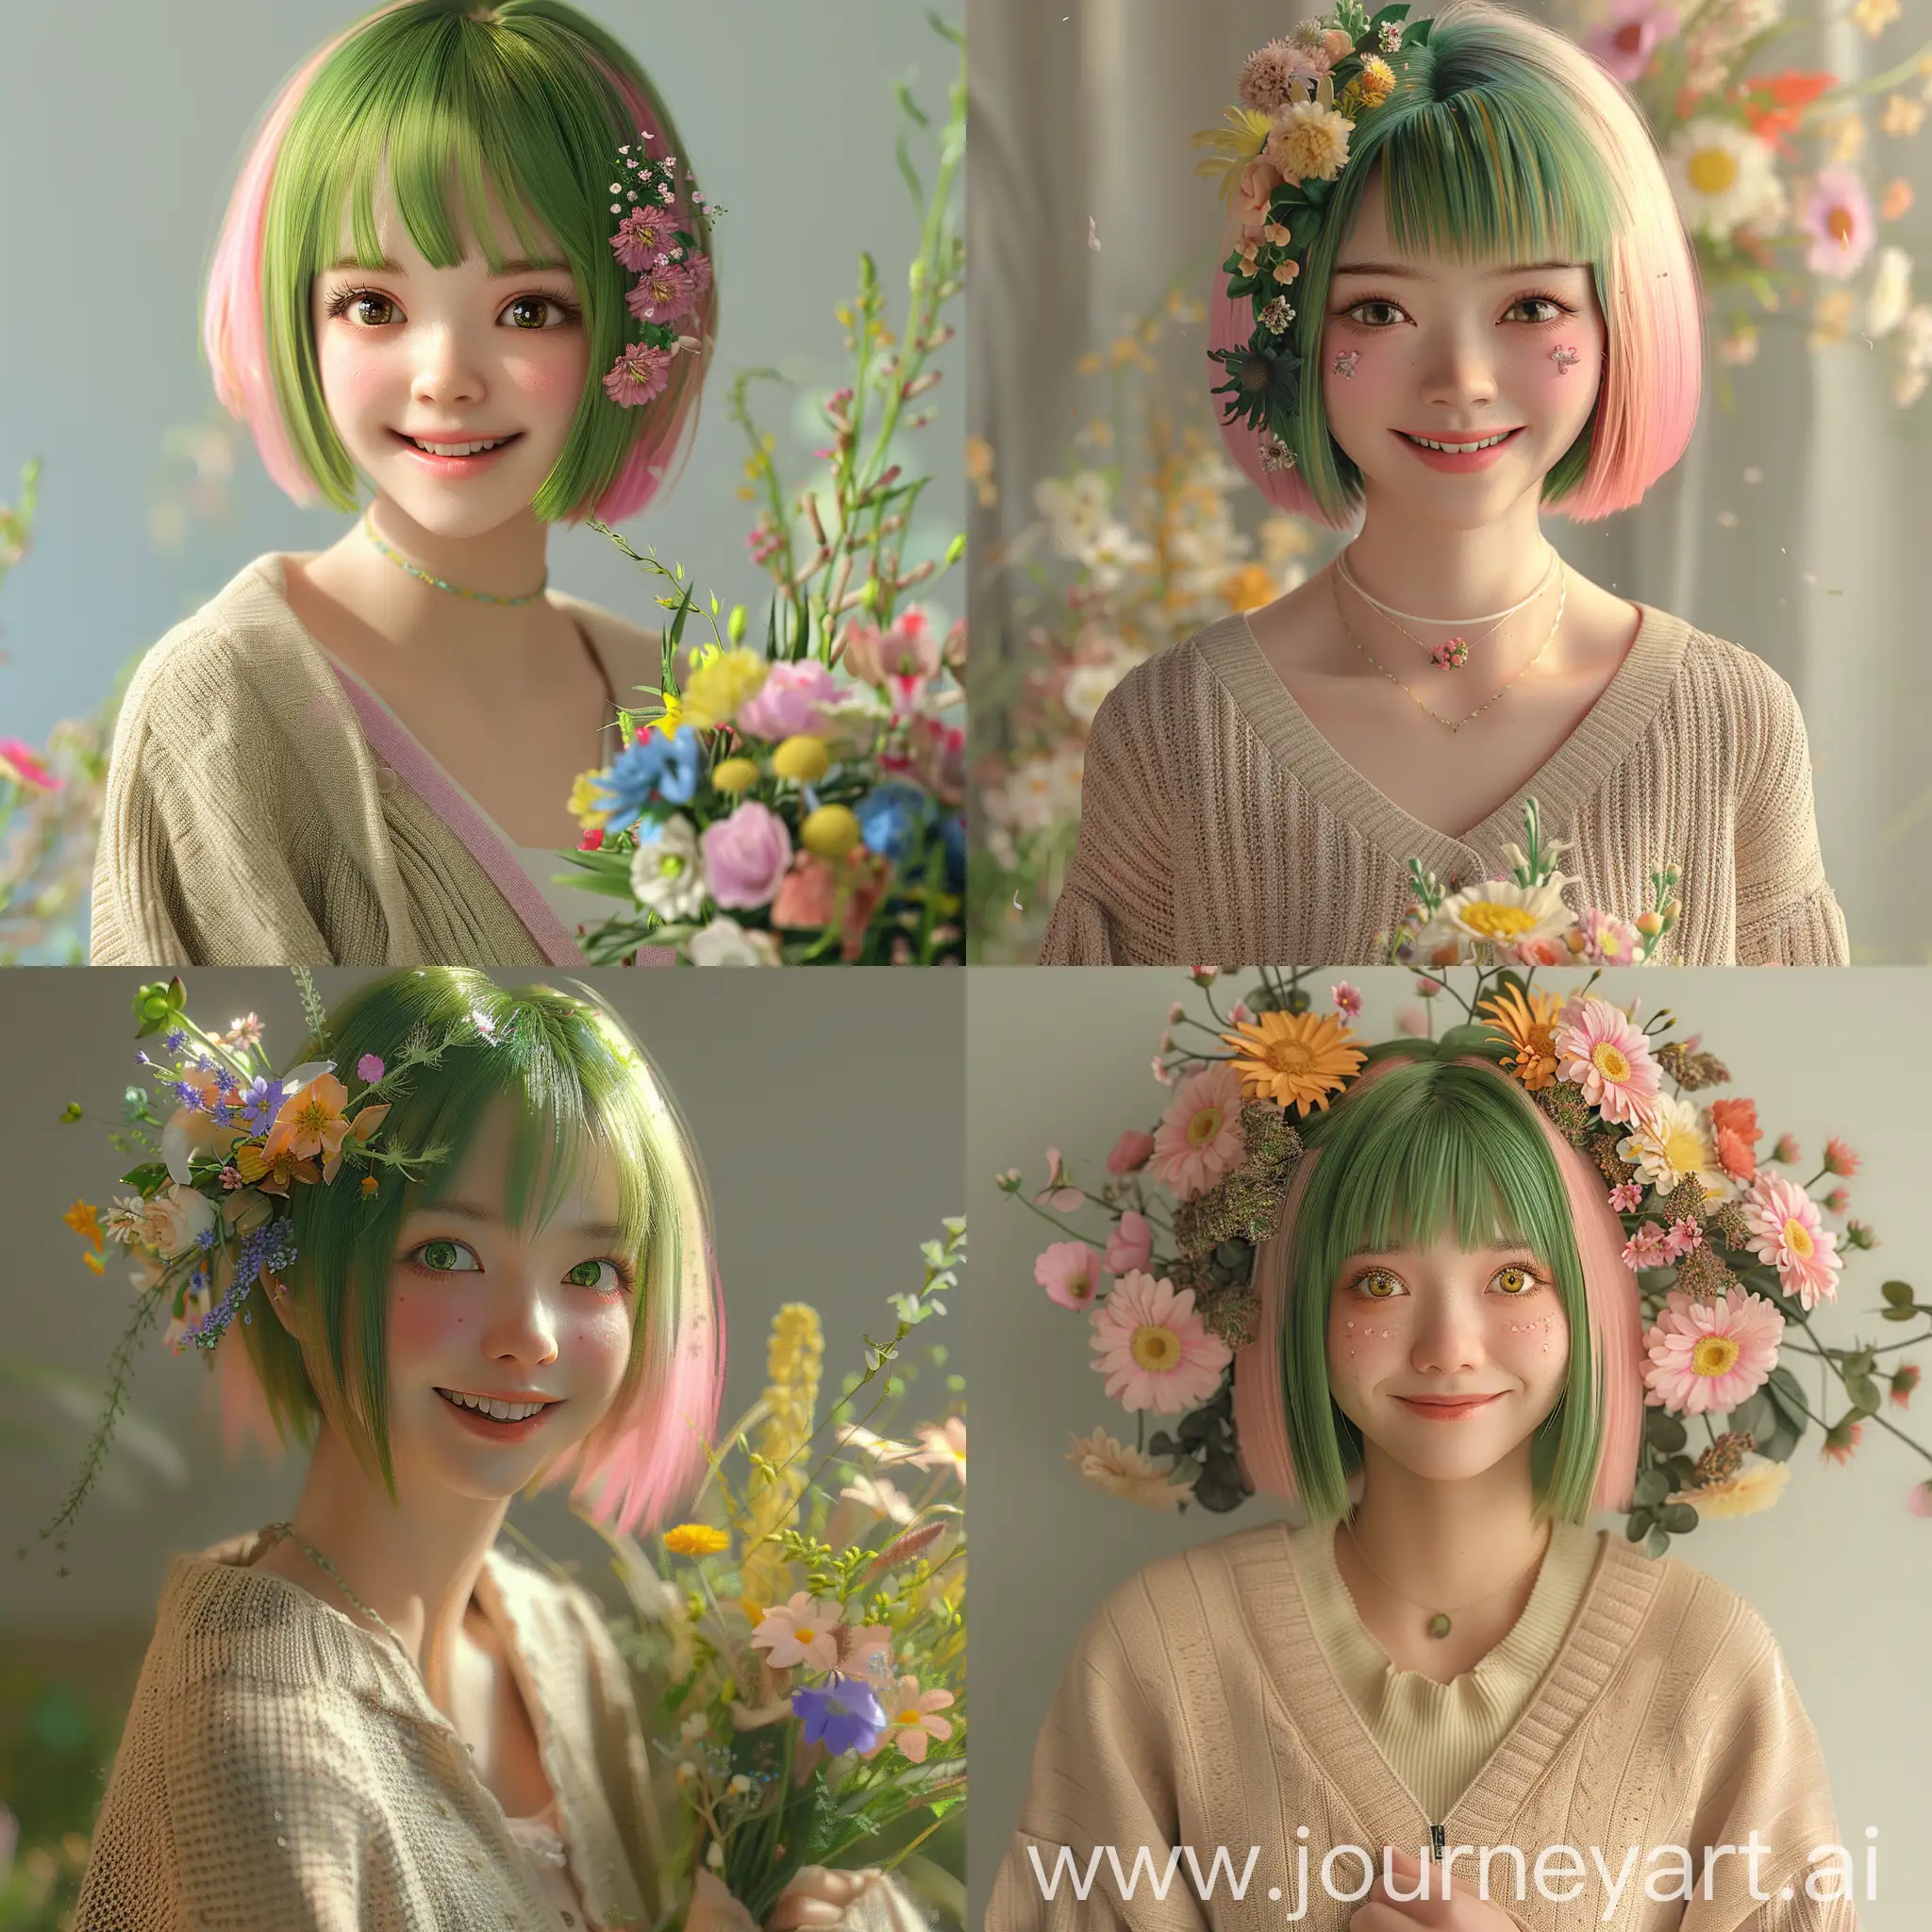 1girl , short green and pink straight hair, wearing beige cardigan , with flowers in her hair, bright eyes, smiling, holding bouquet, spring,rating:general,epic realistic,4d